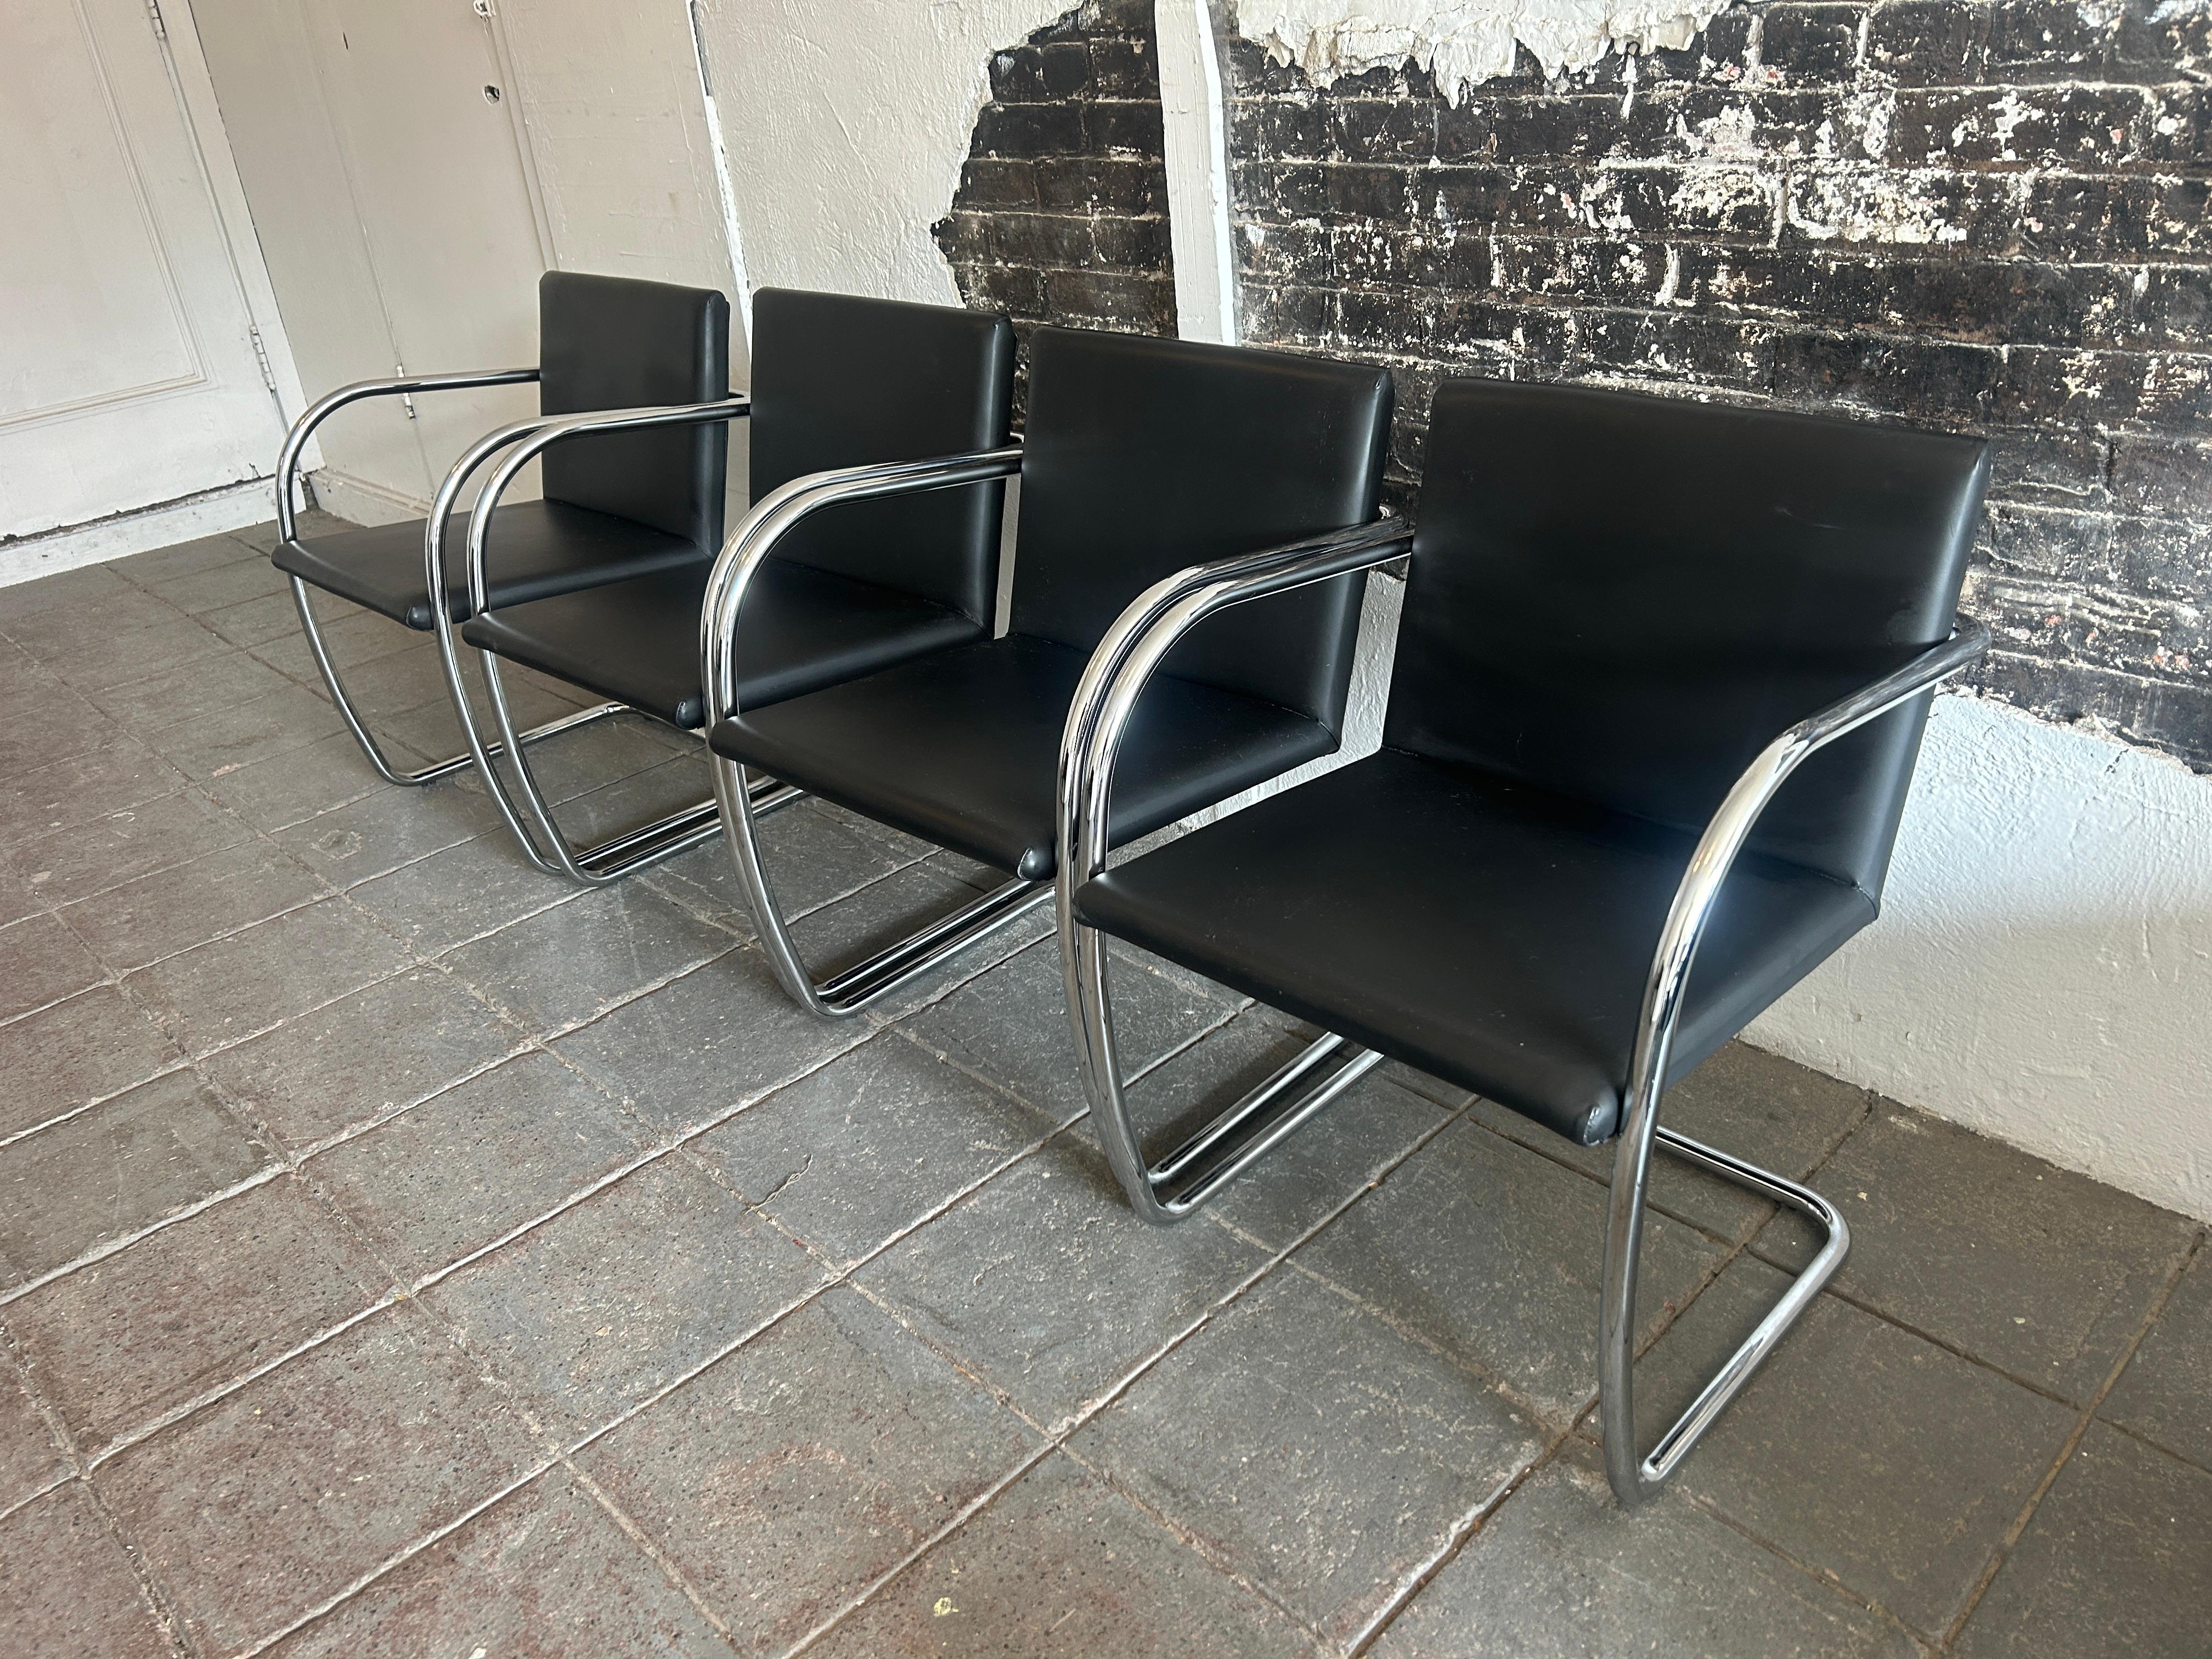 Set of 4 modern black leather Brno chrome tube chairs. Chrome tubular bent frame with soft black leather upholstery. classic modern design by Ludwig Mies van der Rohe. Great for us as dining chairs or office chairs.- Labeled Made in Italy

Sold as a